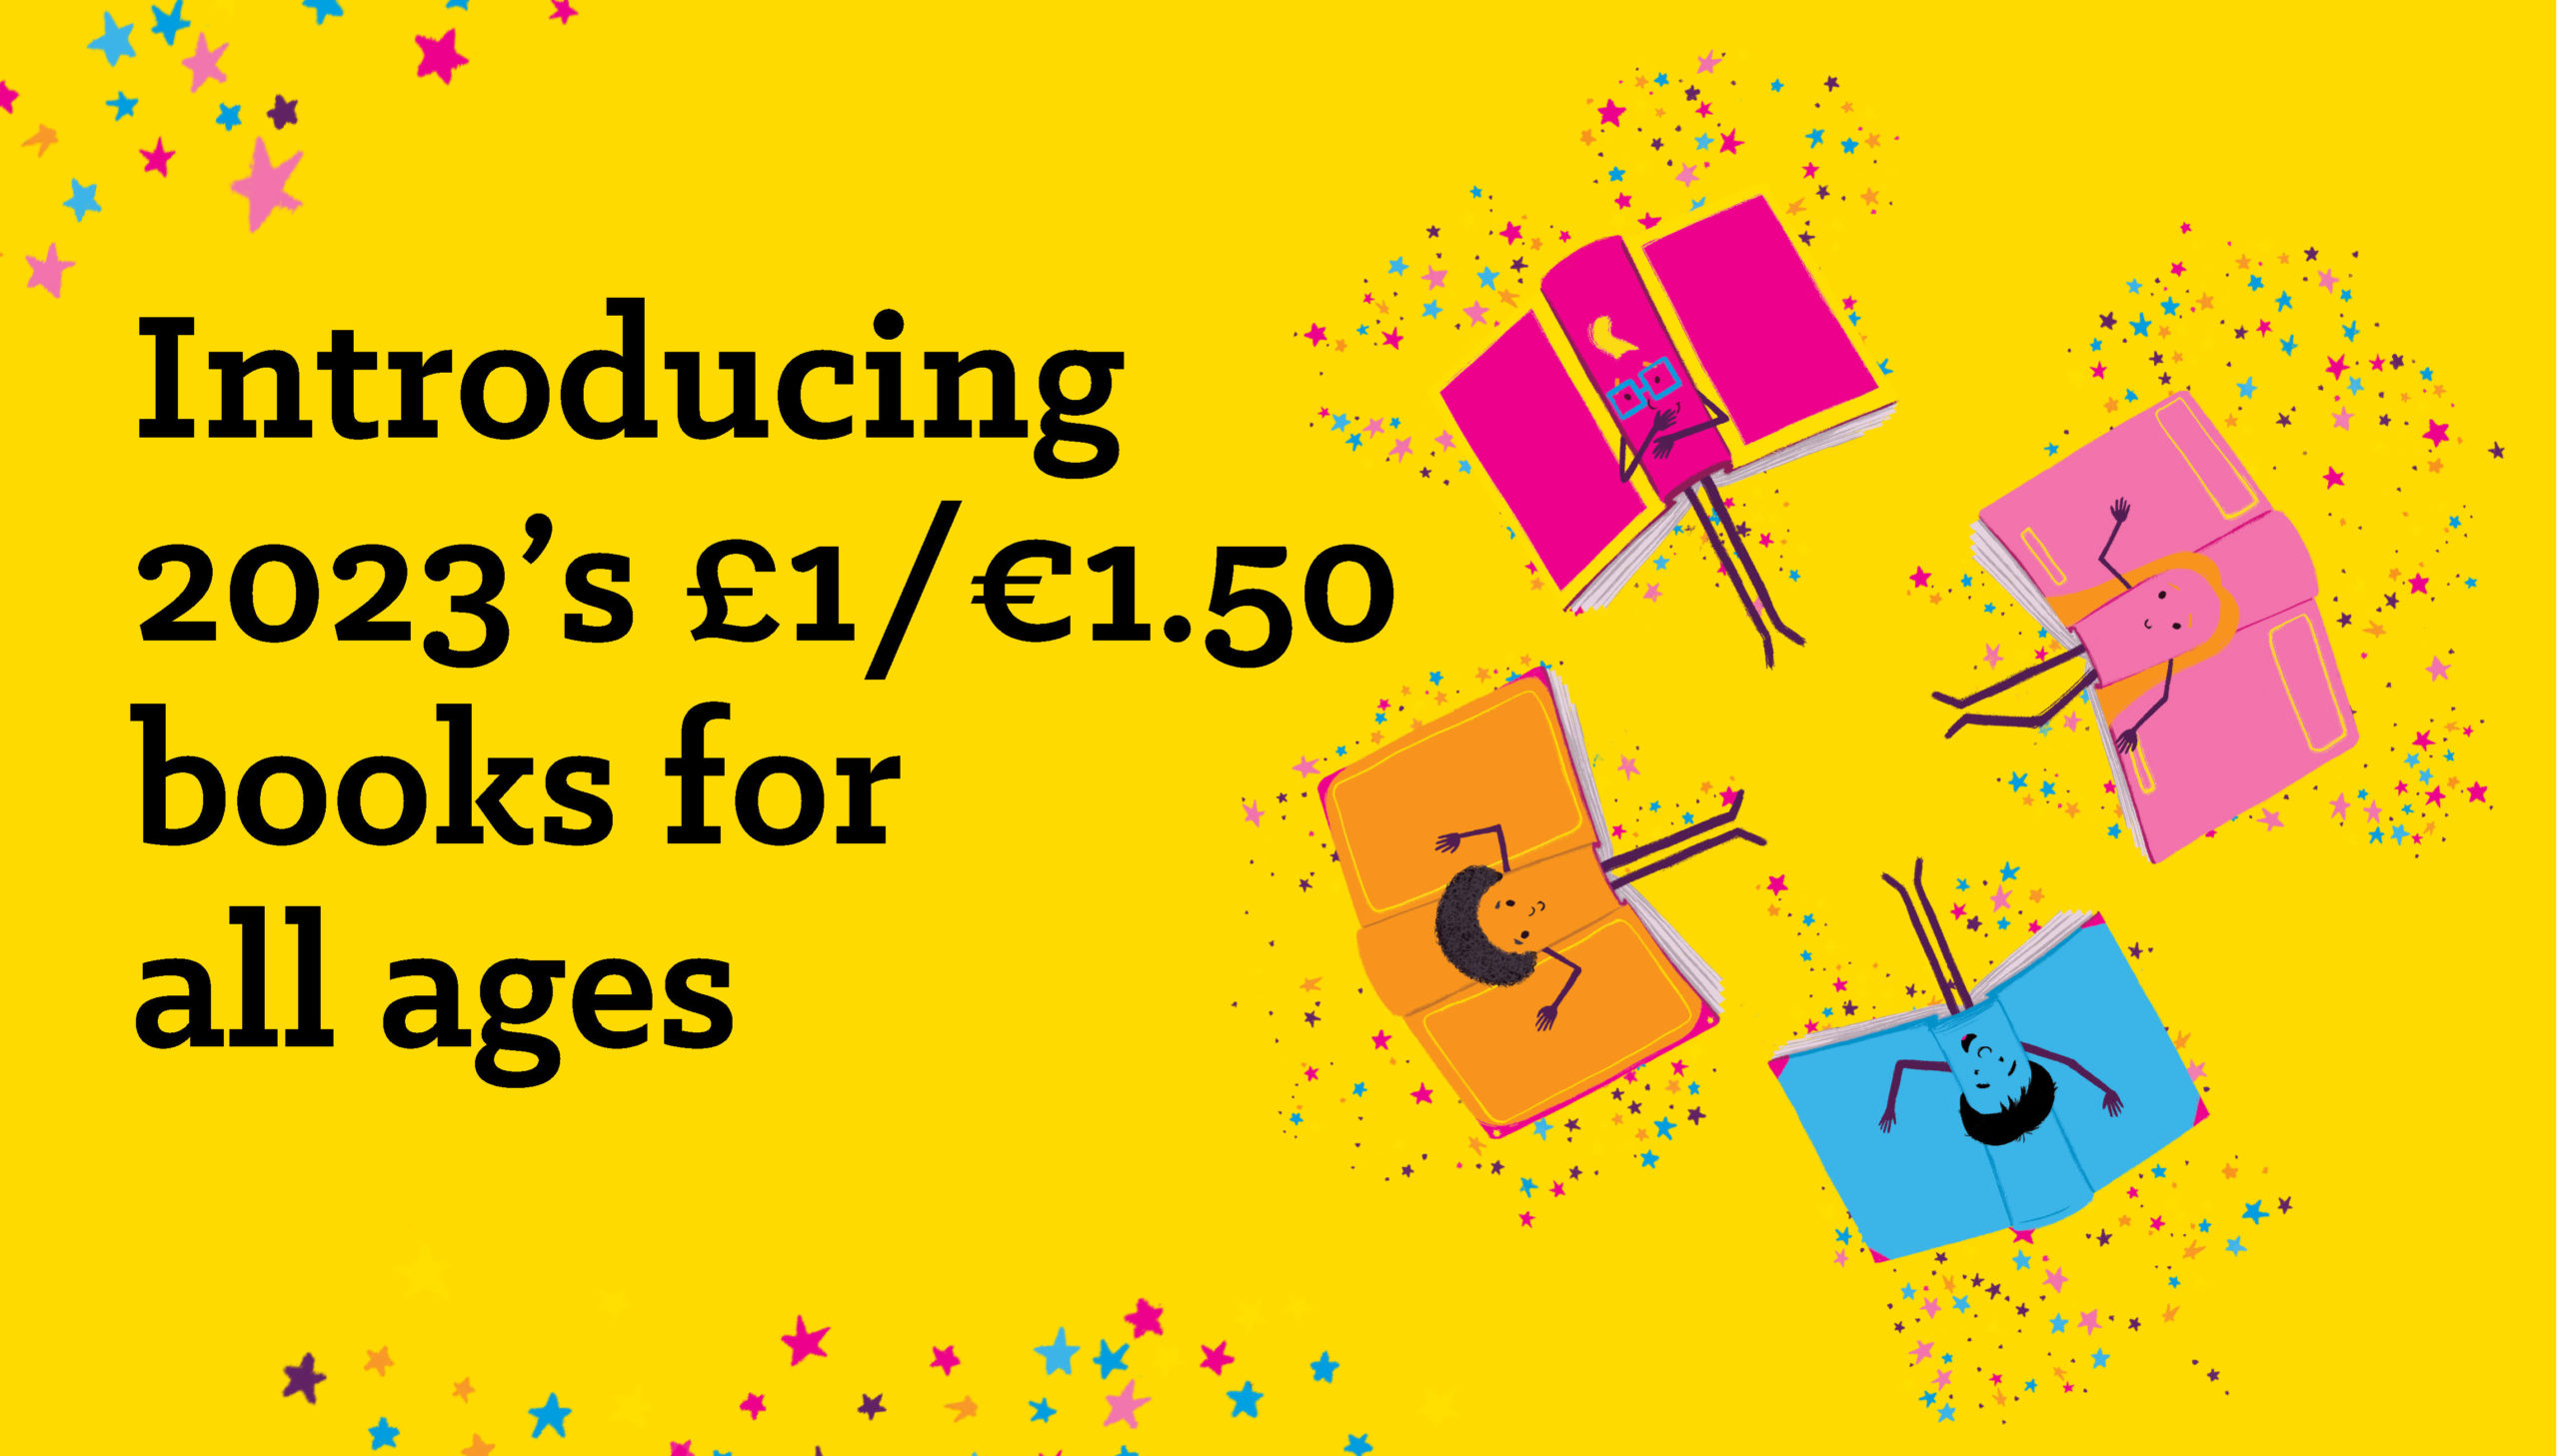 Introducing 2023's £1/€1.50 books for all ages